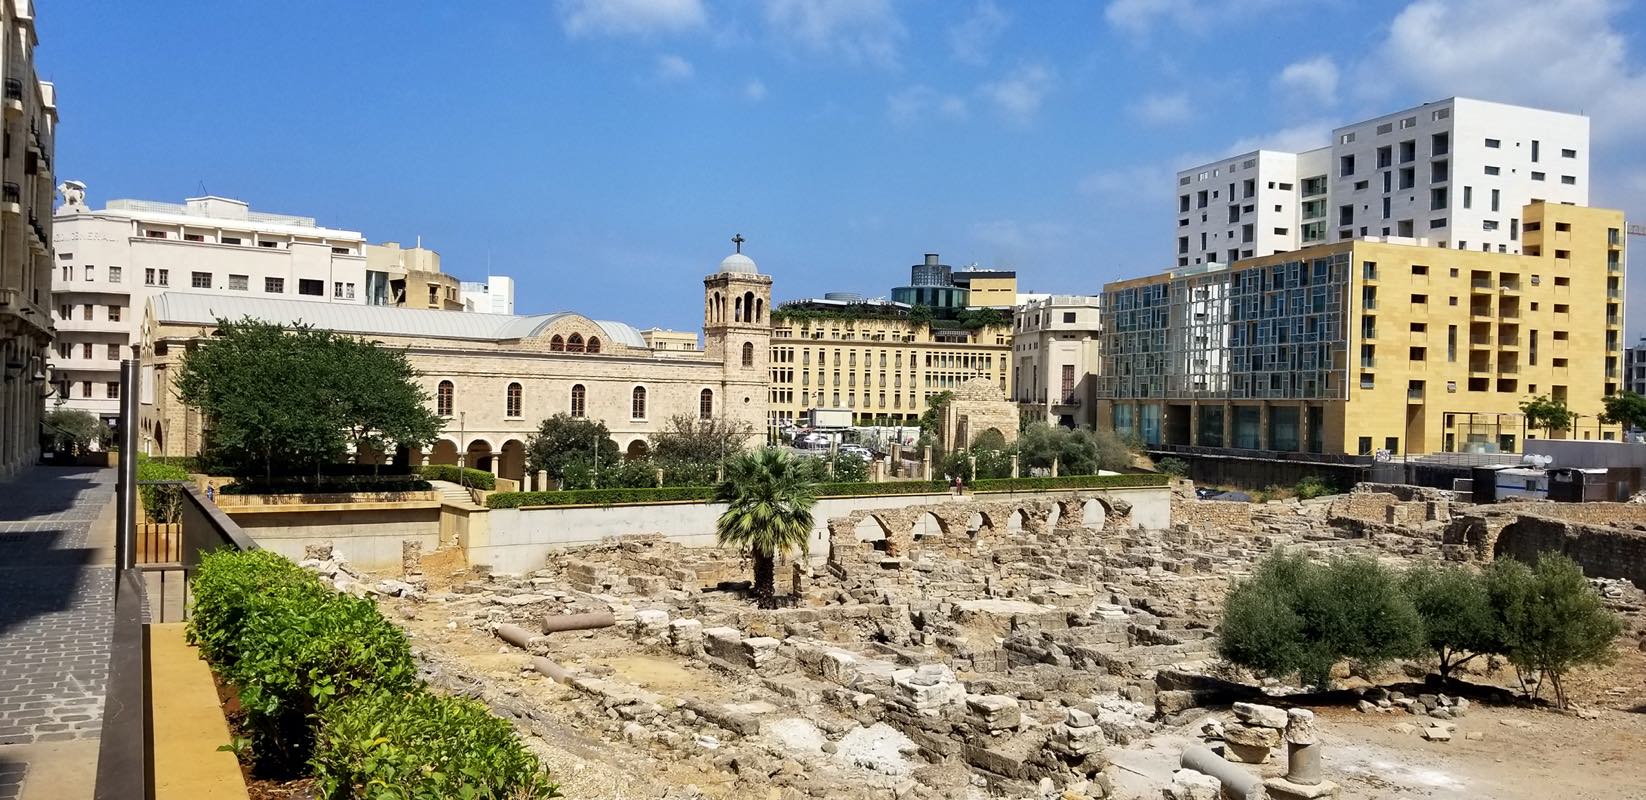 View over Roman archaeological site, with St. George Greek Orthodox Cathedral in background.